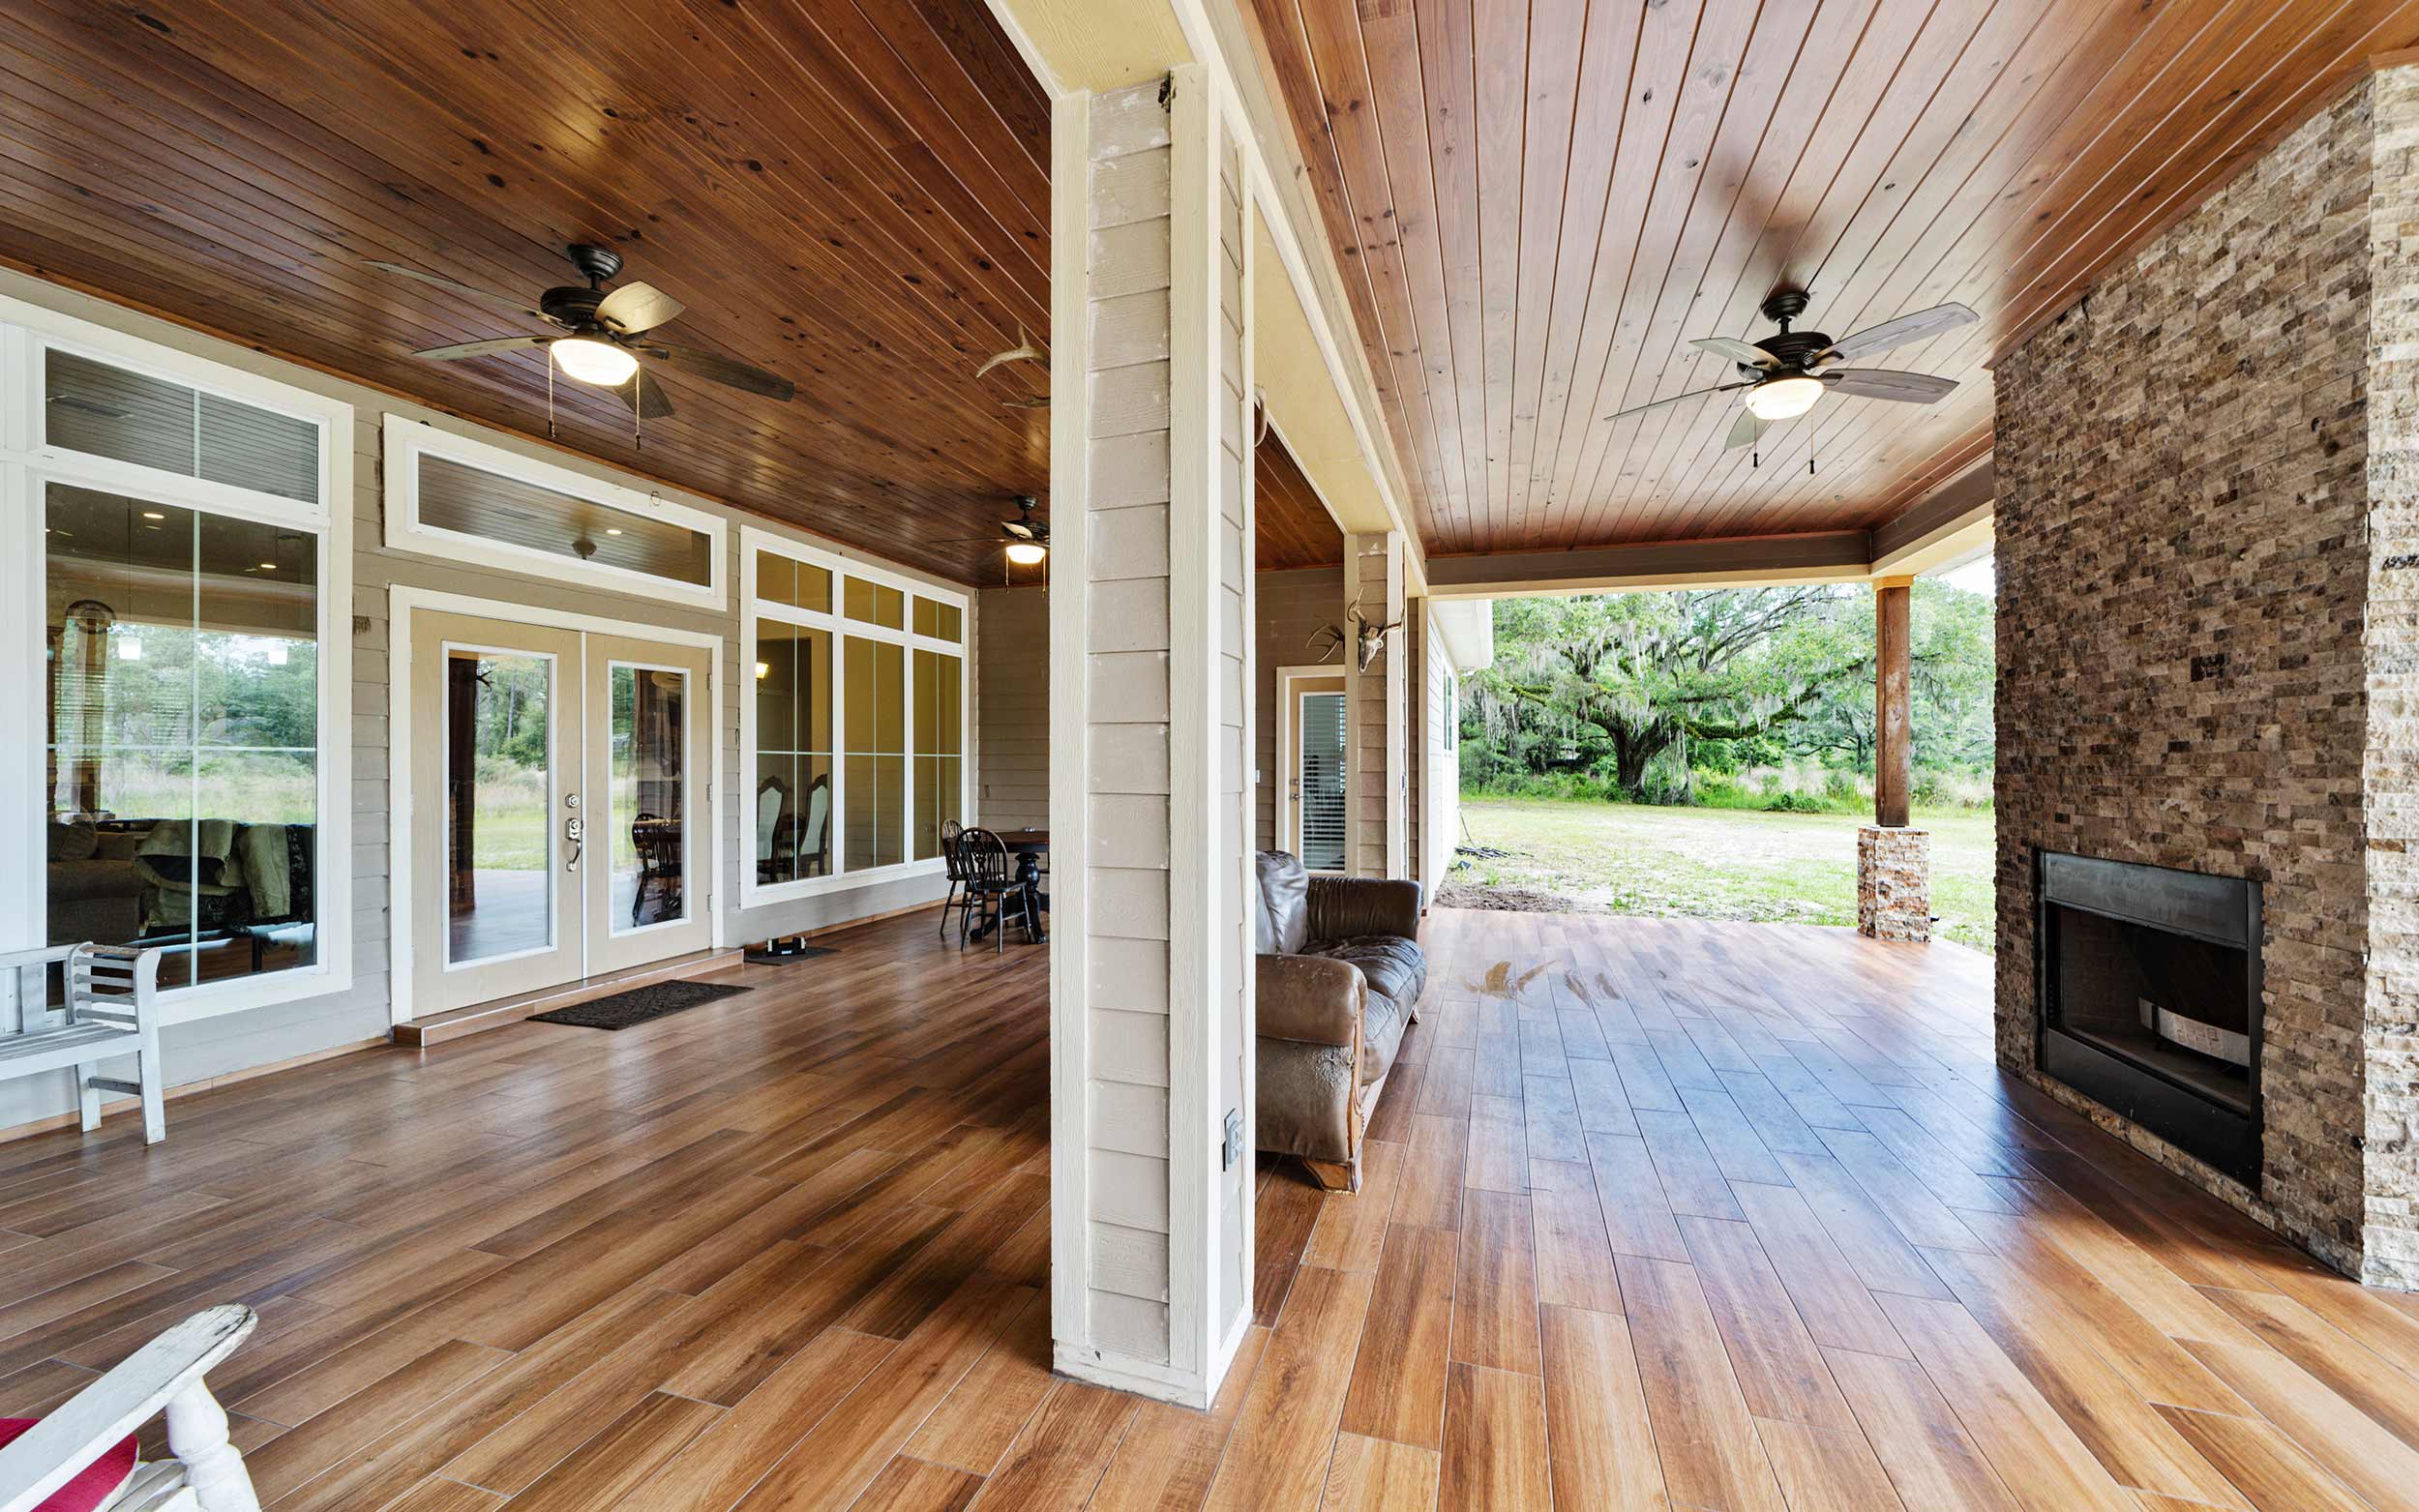 The large covered porch with floor-to-ceiling-fireplace.